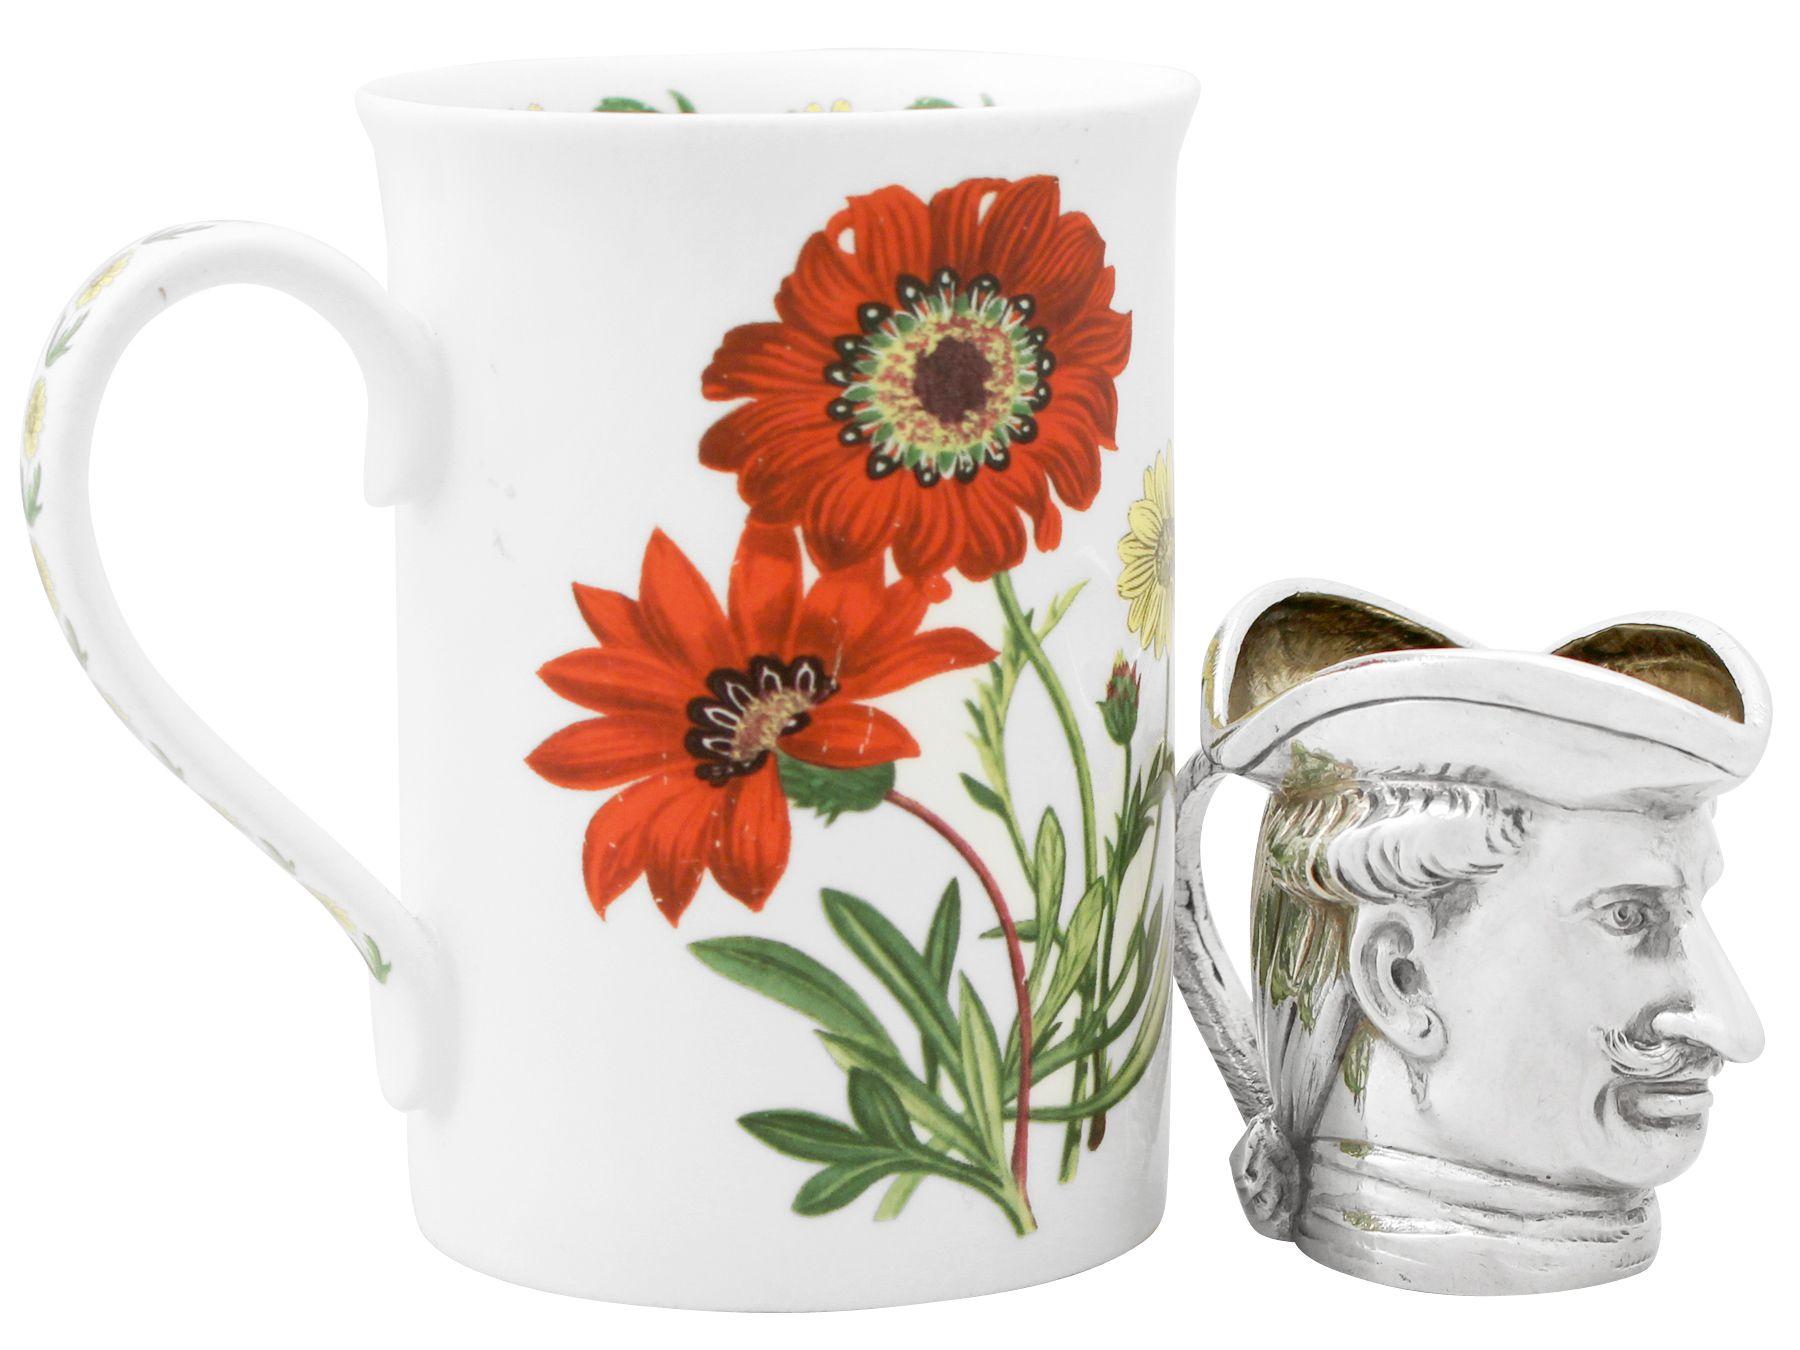 An exceptional, fine and impressive antique German sterling silver novelty creamer; an addition to our silver teaware collection

This exceptional antique German sterling silver cream jug has been realistically modelled in the form of an 18th